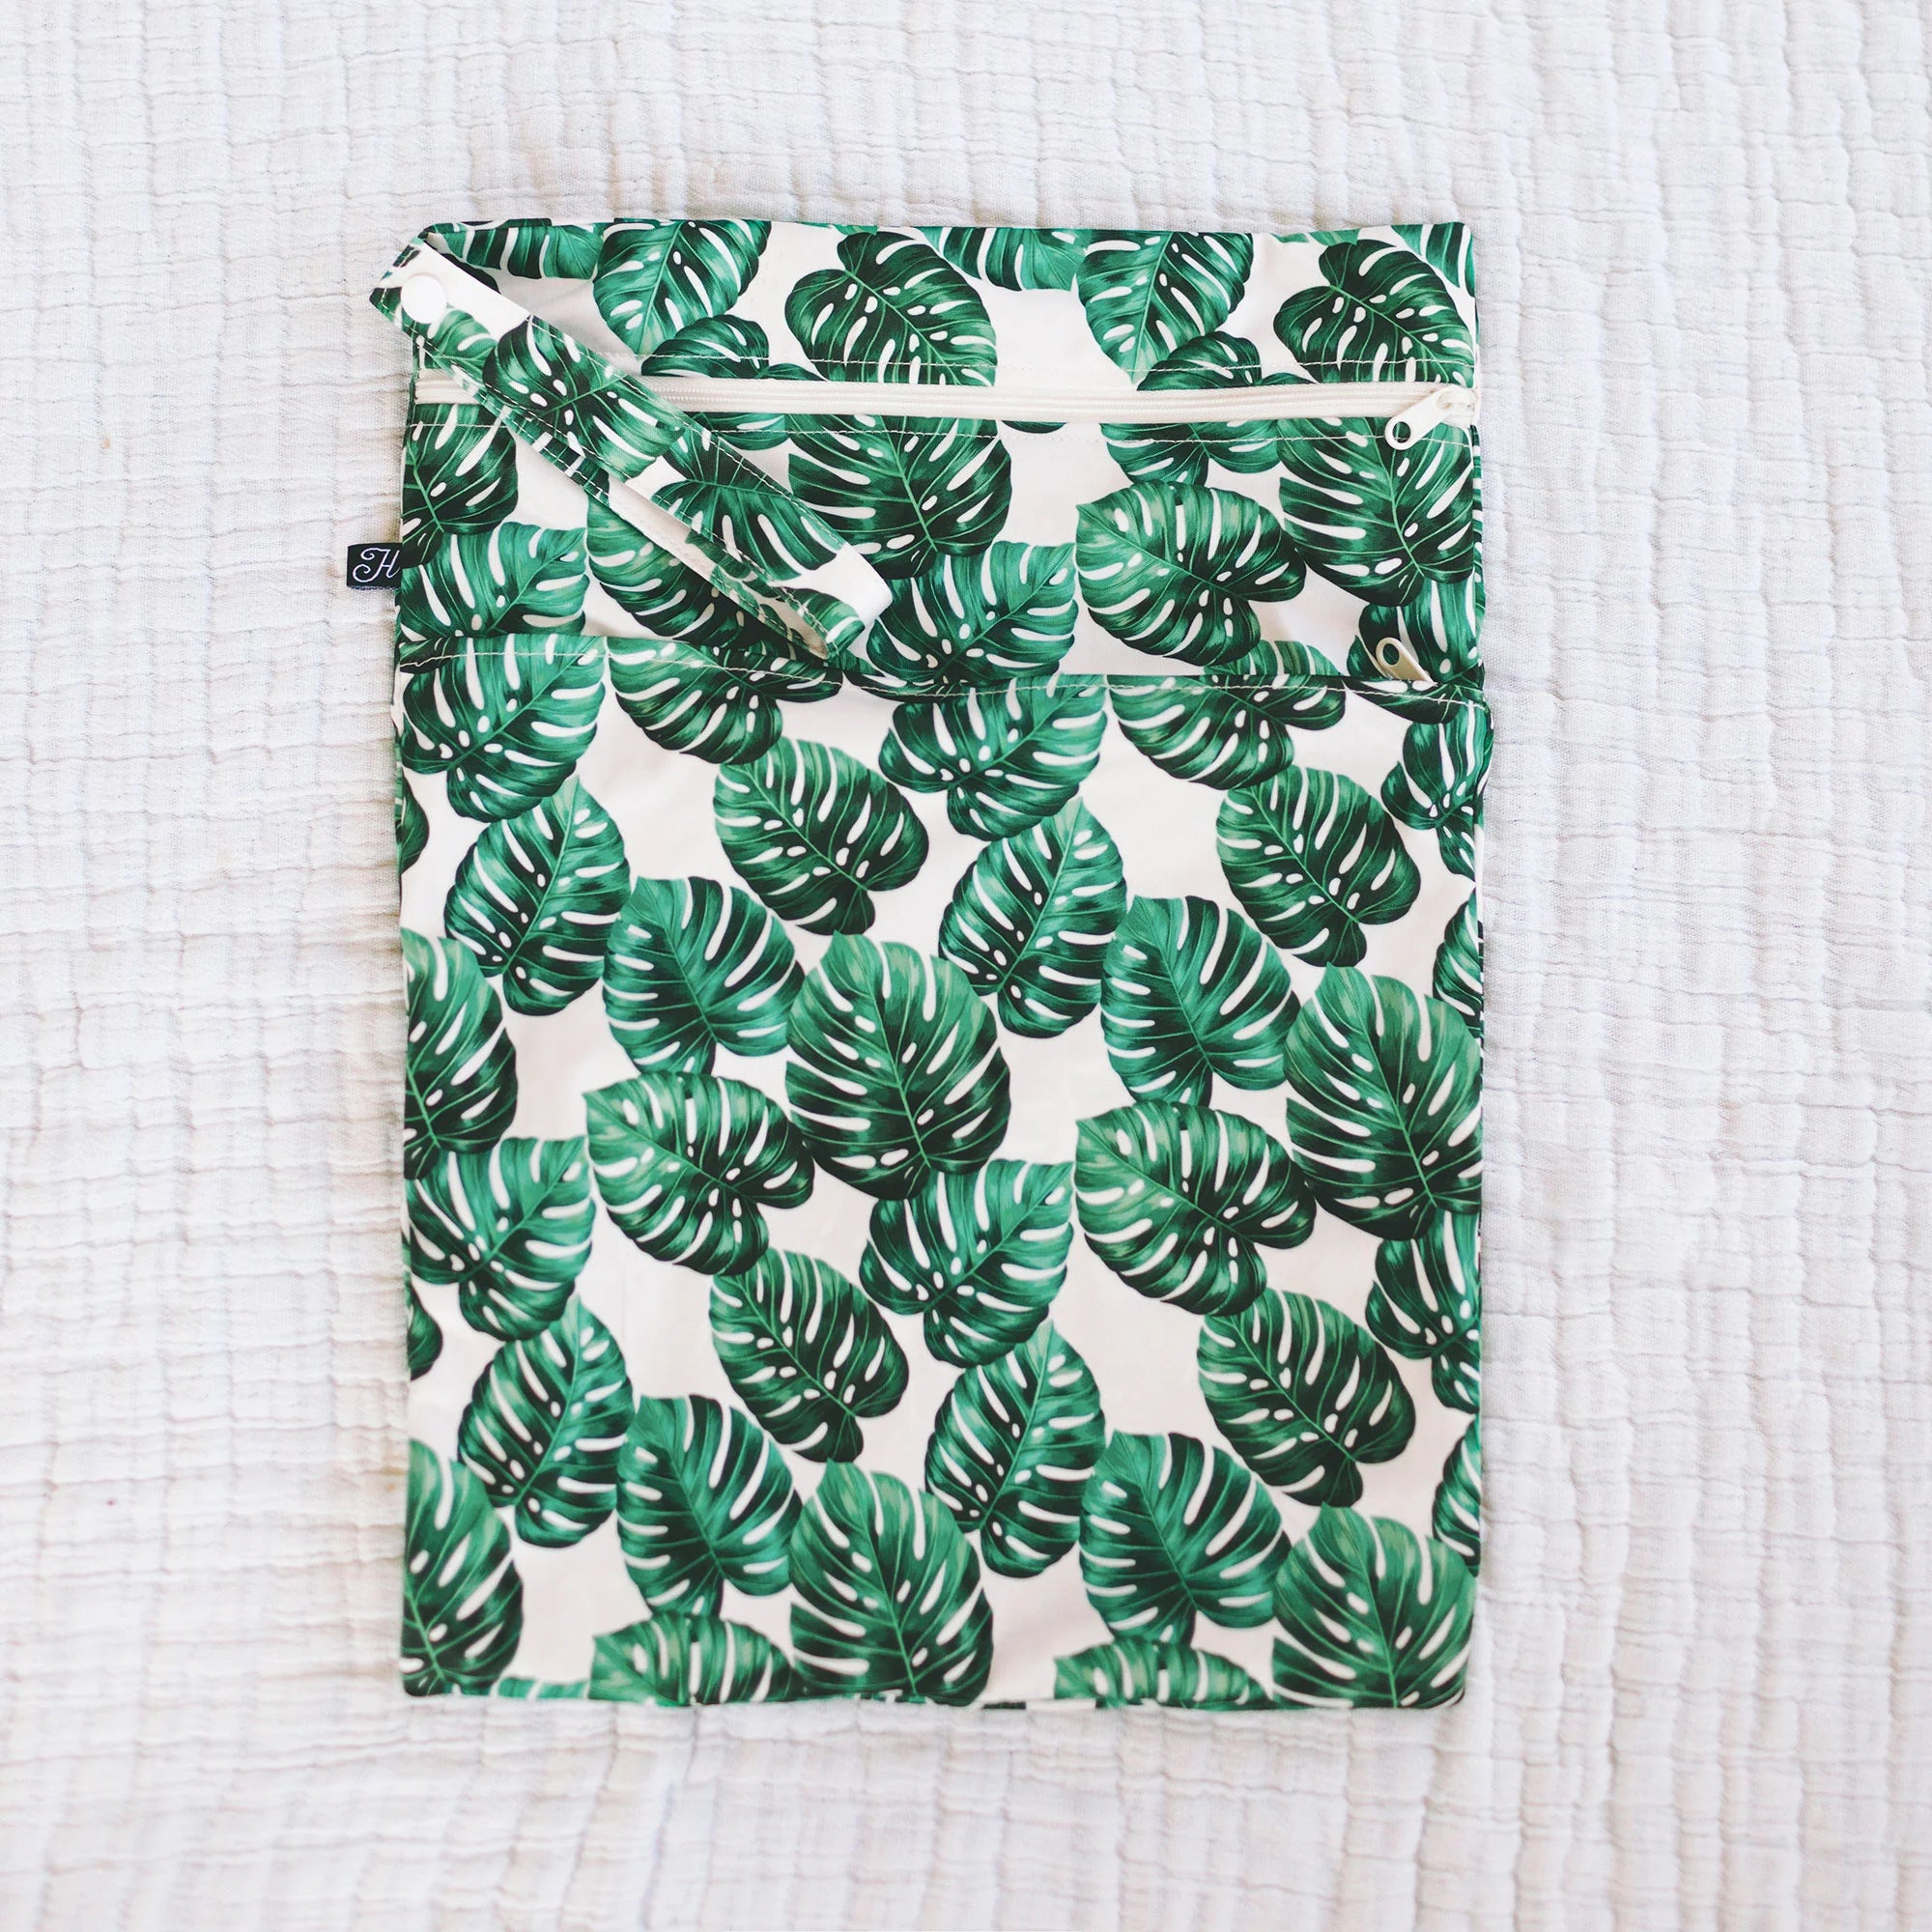 Honeysuckle Swim Co - Wetbag (Leaf of the Party)